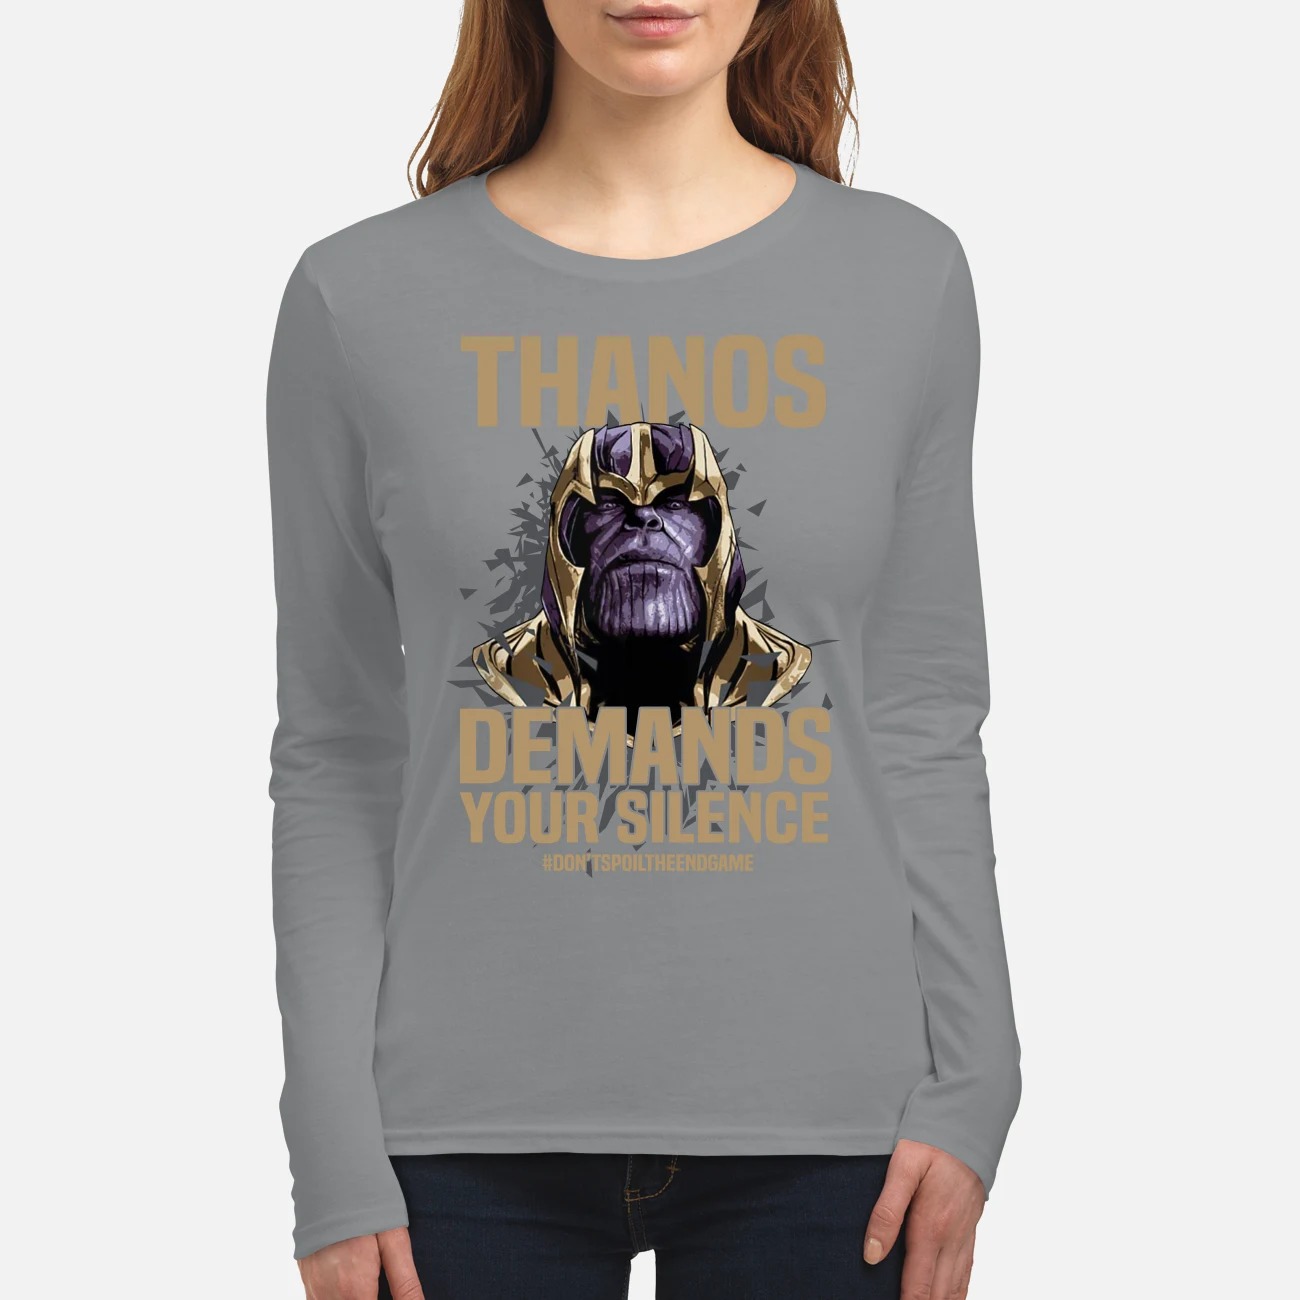 Thanos demands your silence dont spoil the end game women's long sleeved shirt